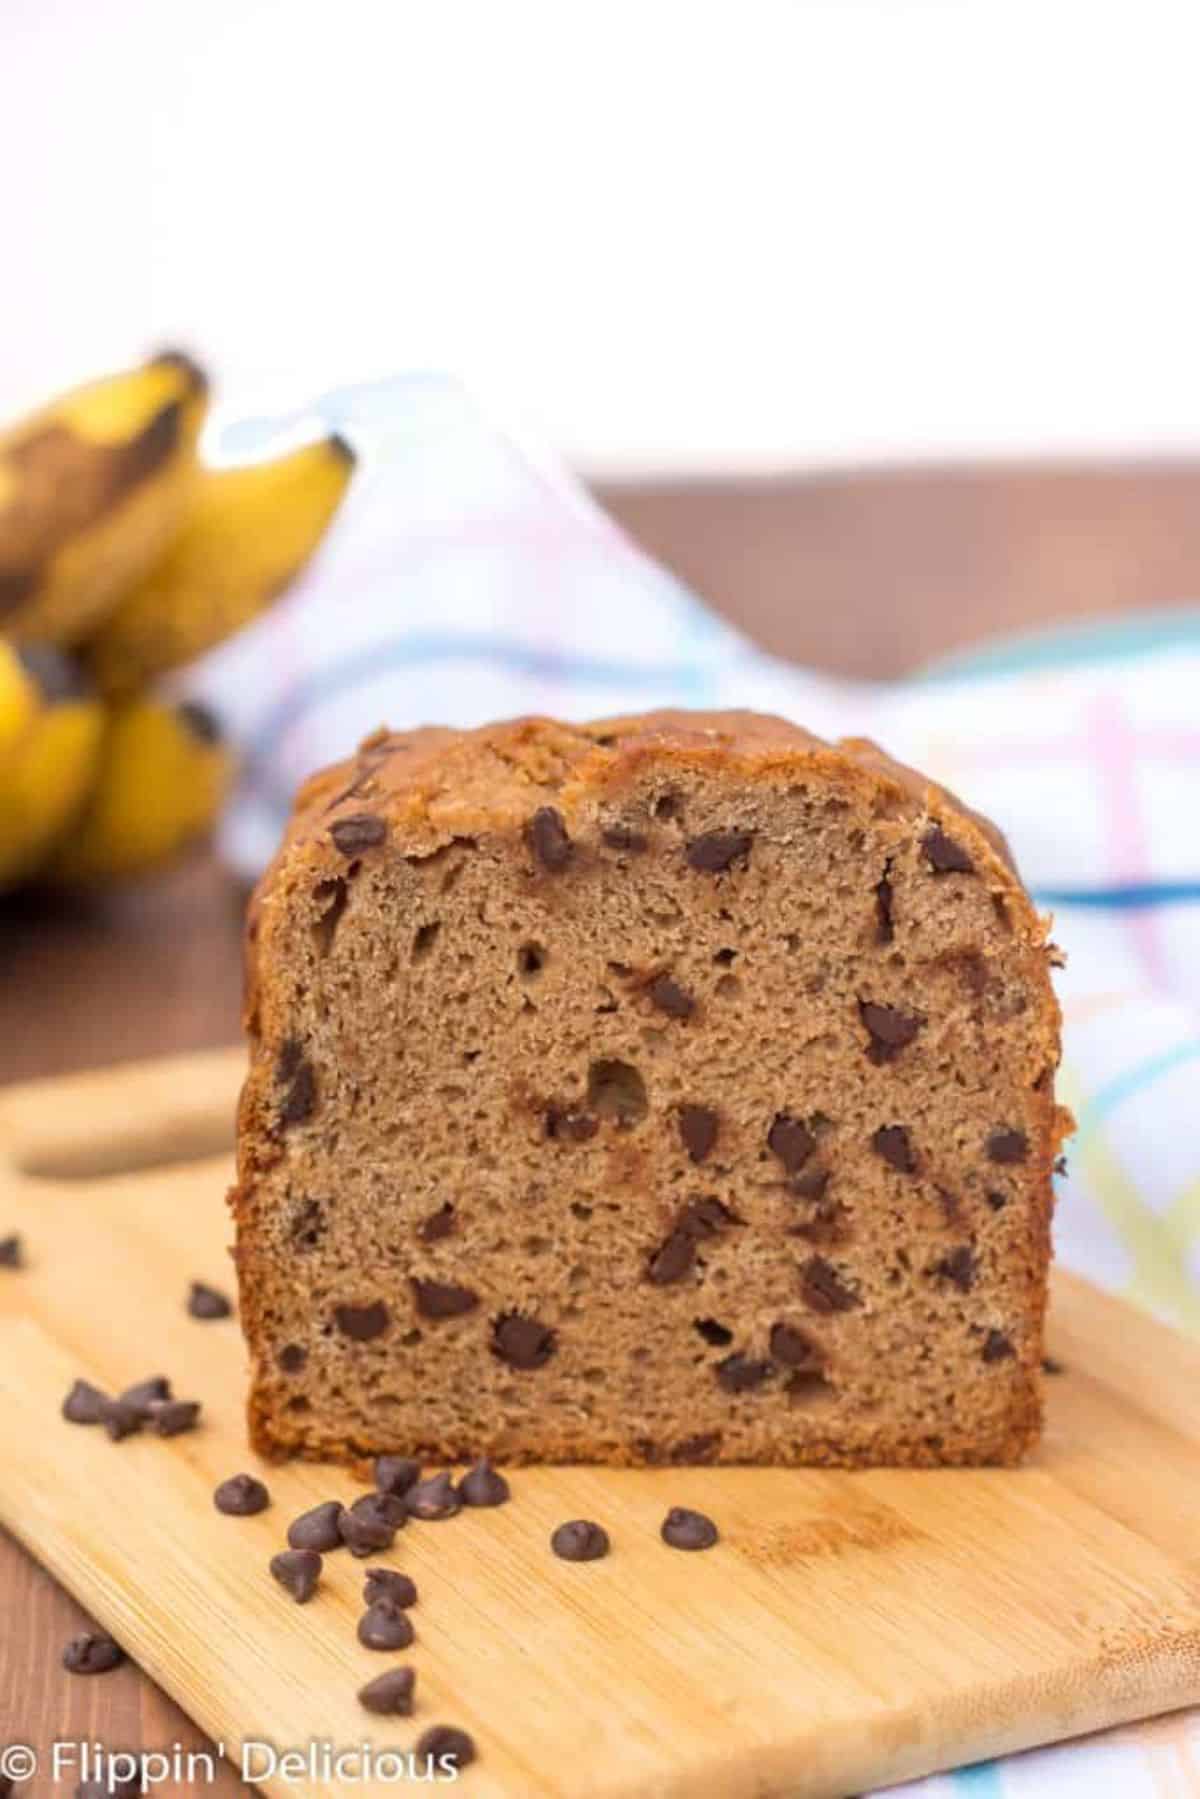 Delicious Chocolate Chip Banana Bread on a wooden cutting board.